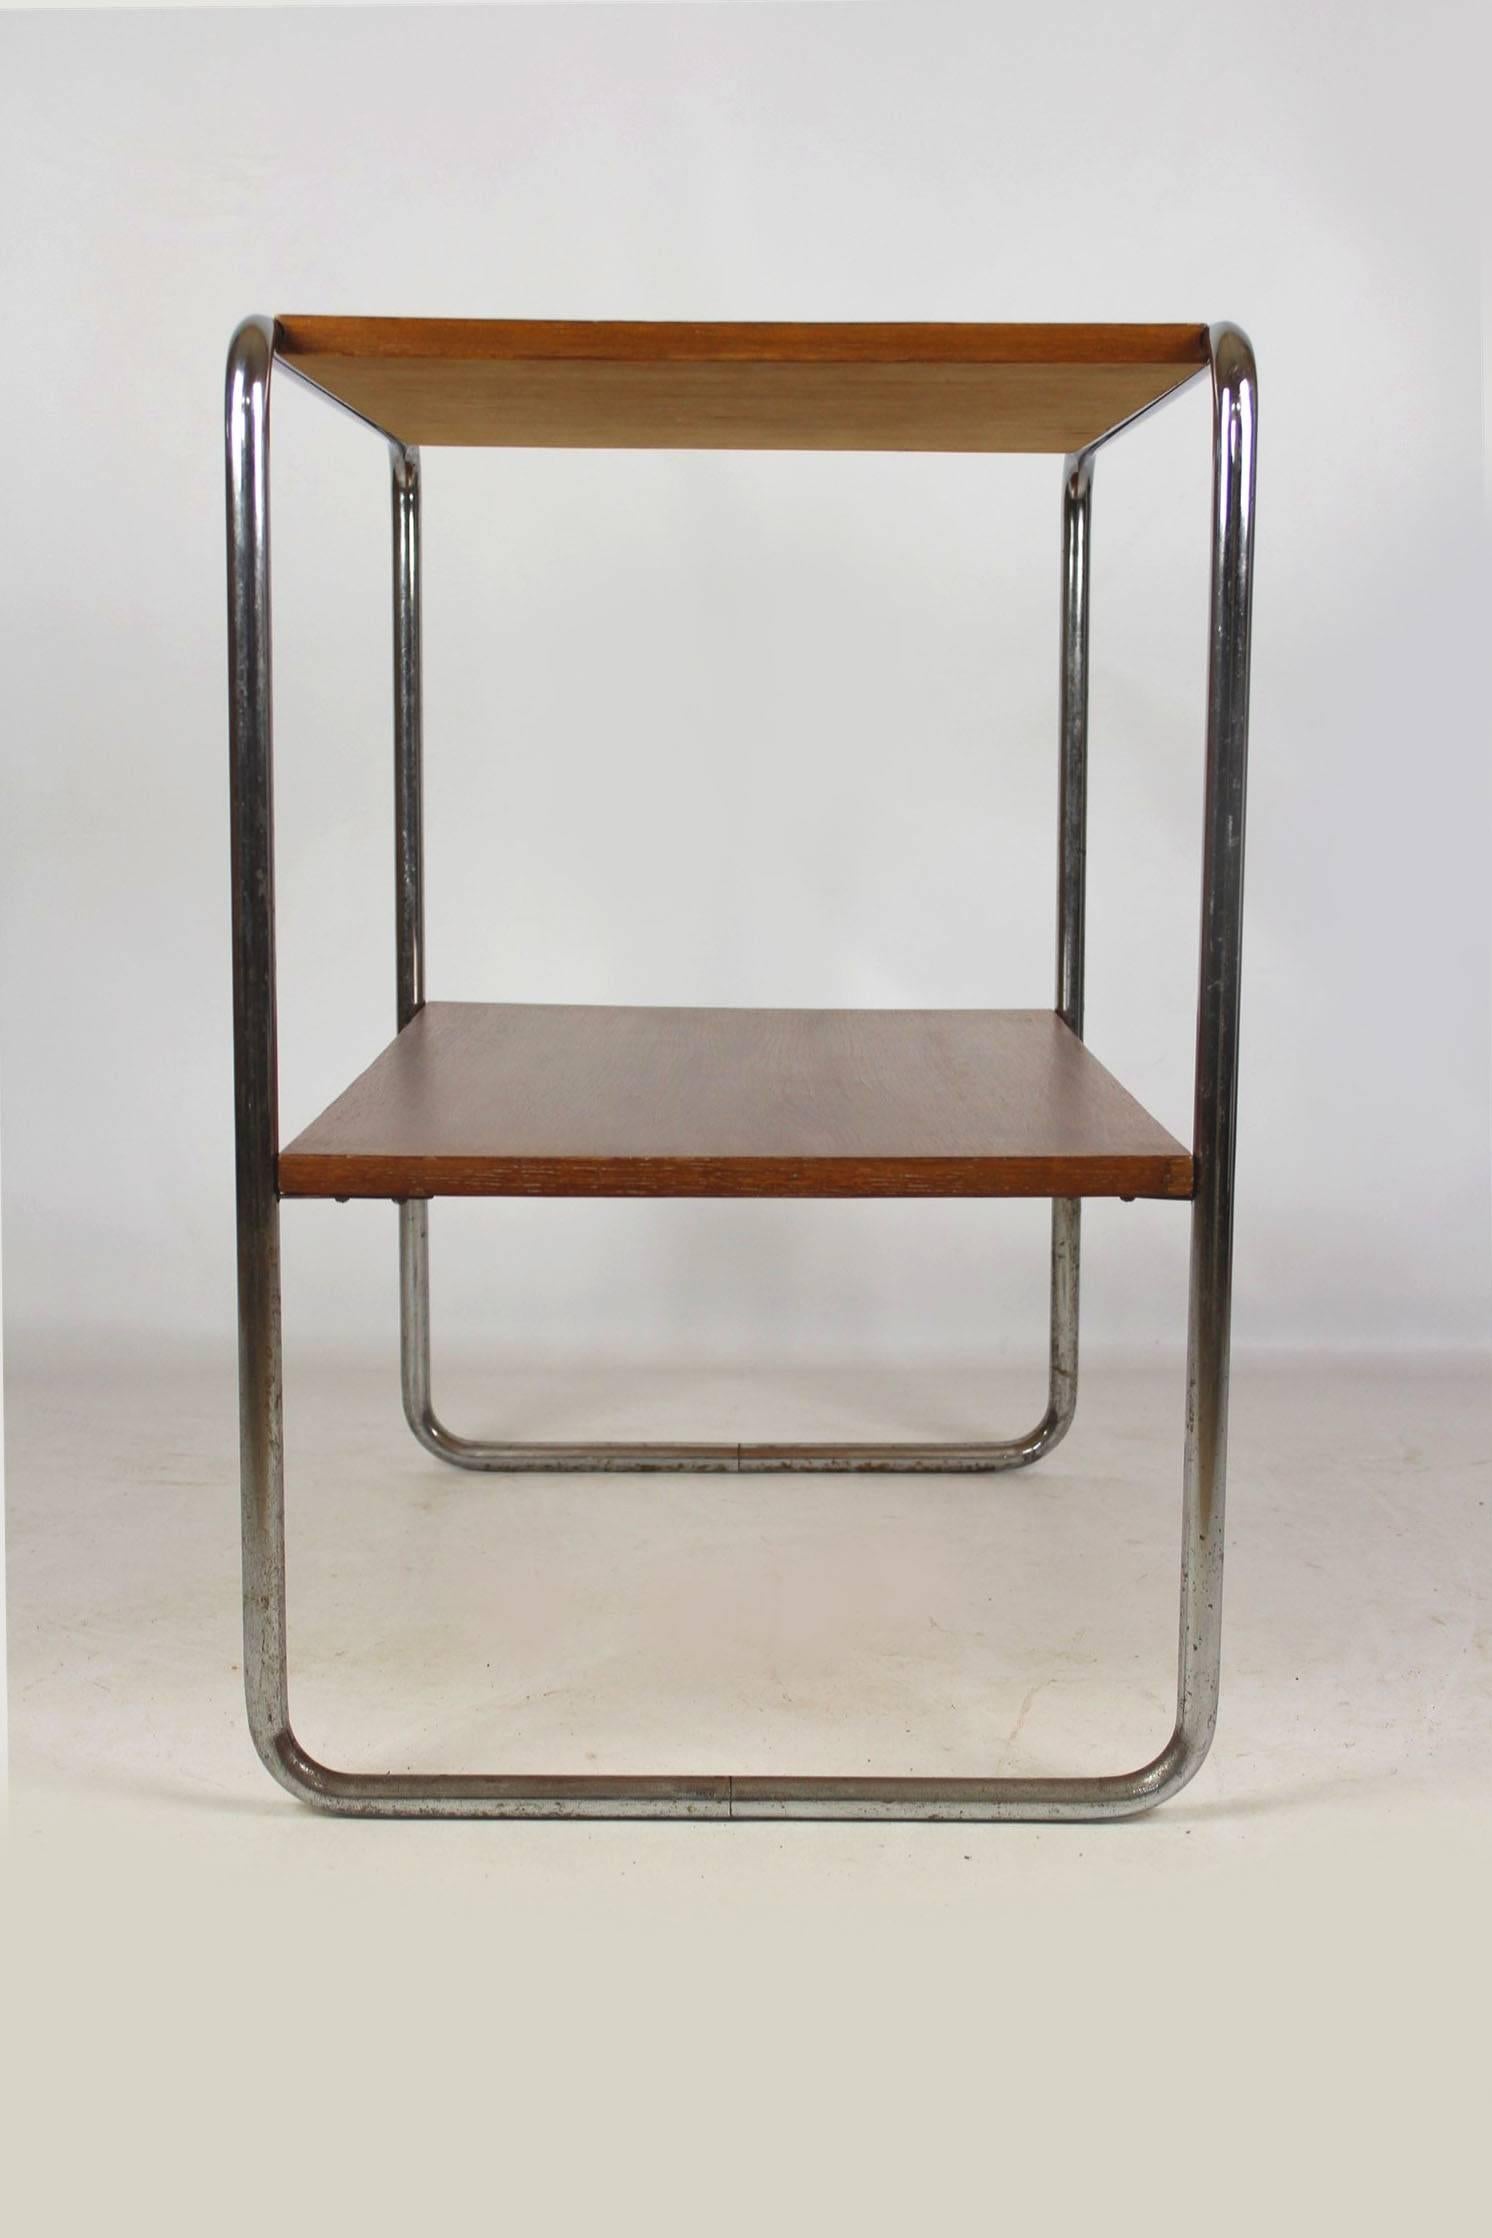 Steel B12 Console Table by Marcel Breuer for Thonet, 1930s